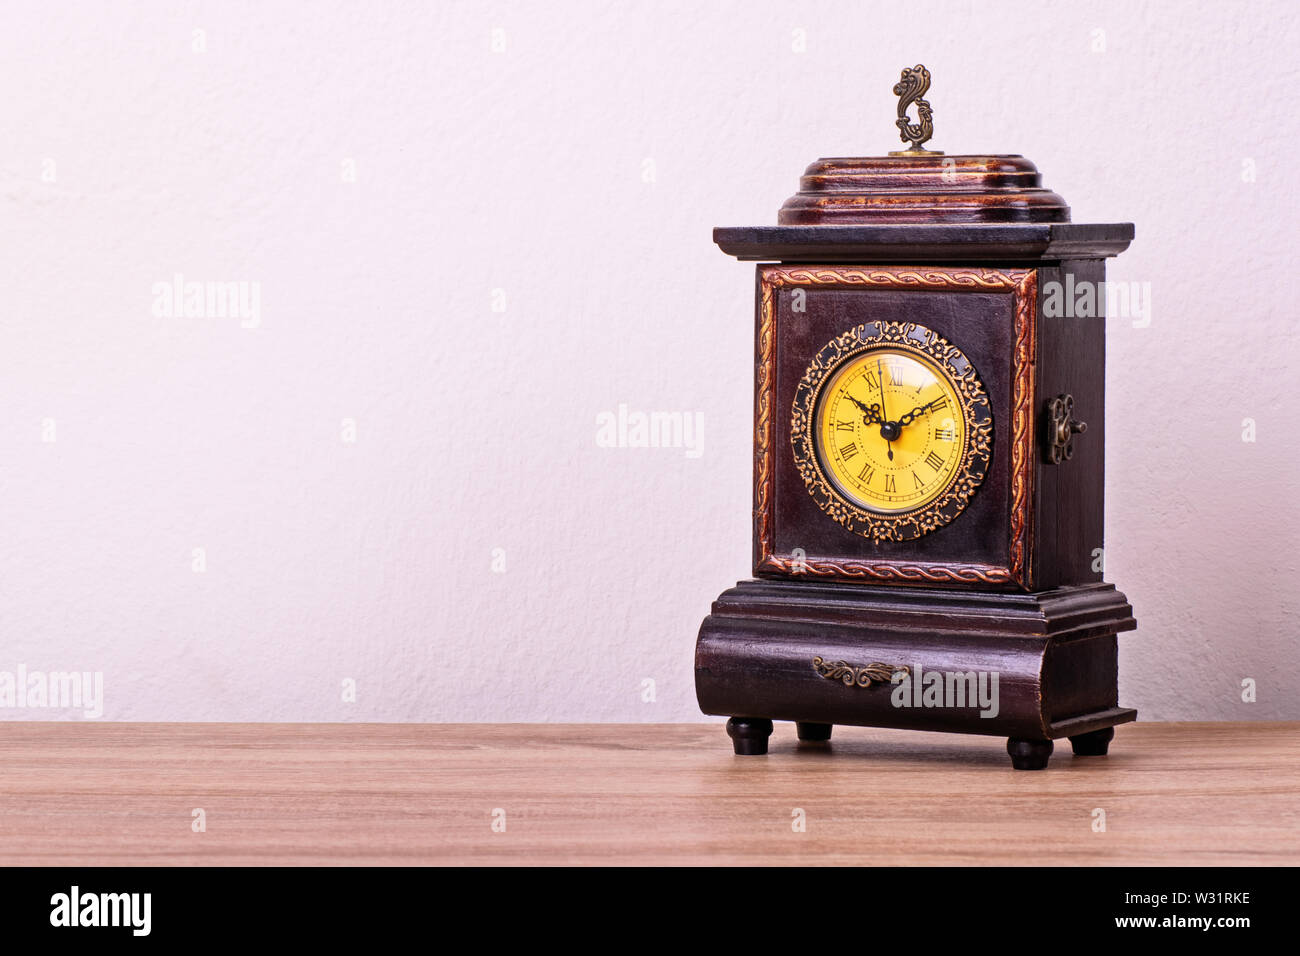 Antique Victorian clock on a wooden table. Stock Photo